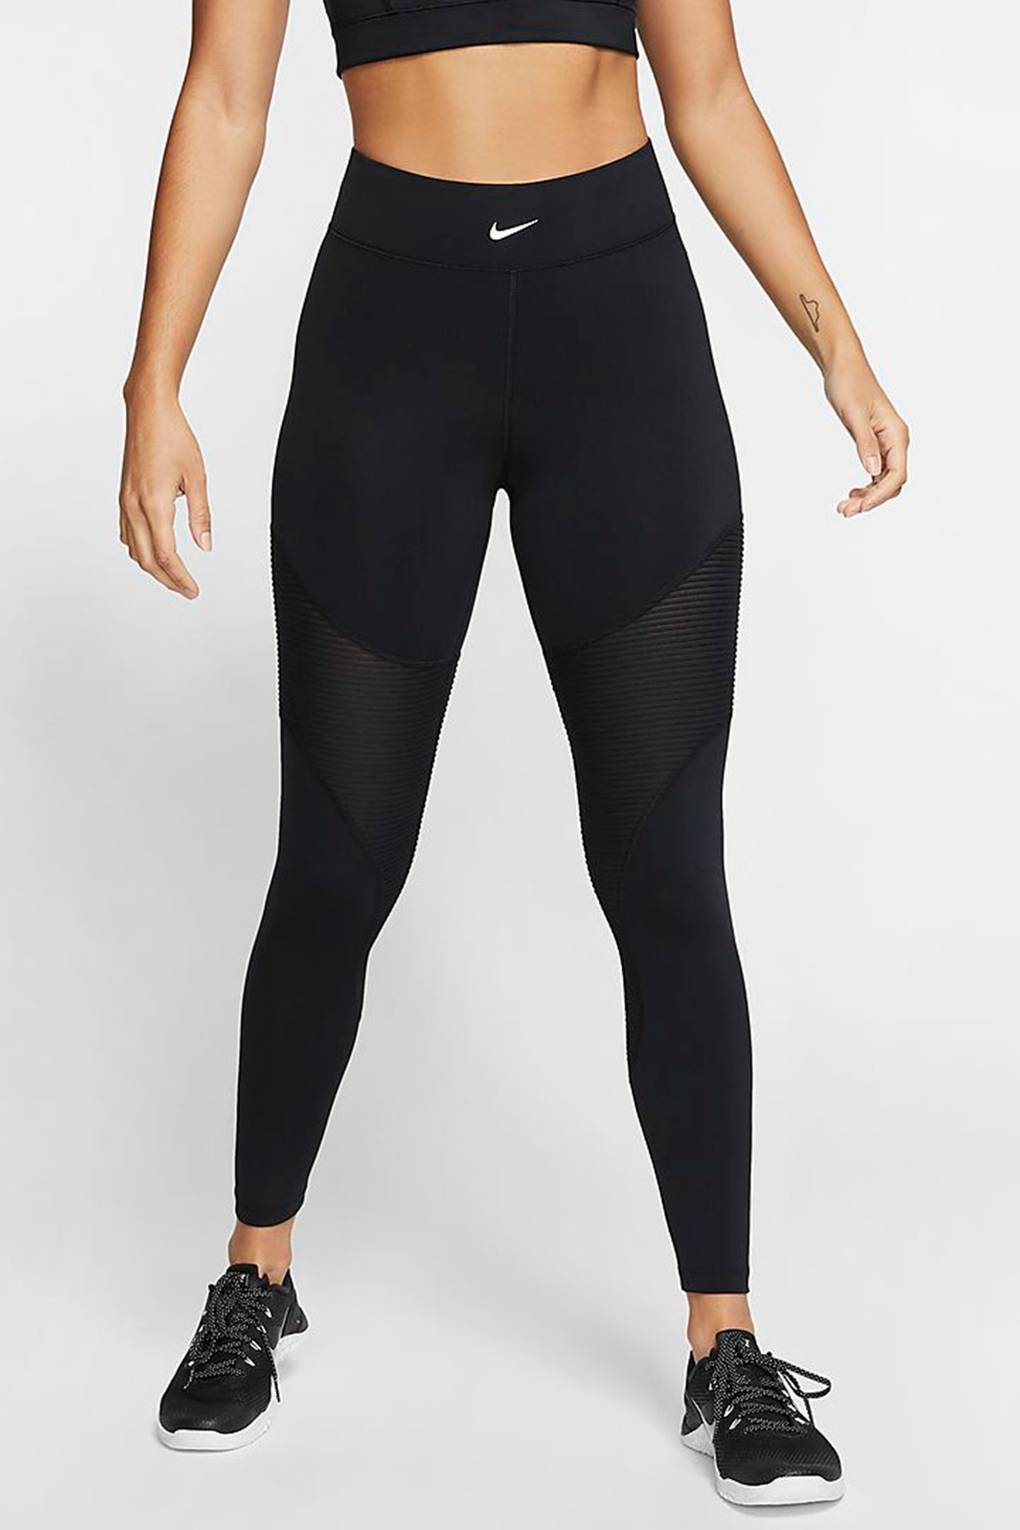 How to avoid crotch sweat in leggings